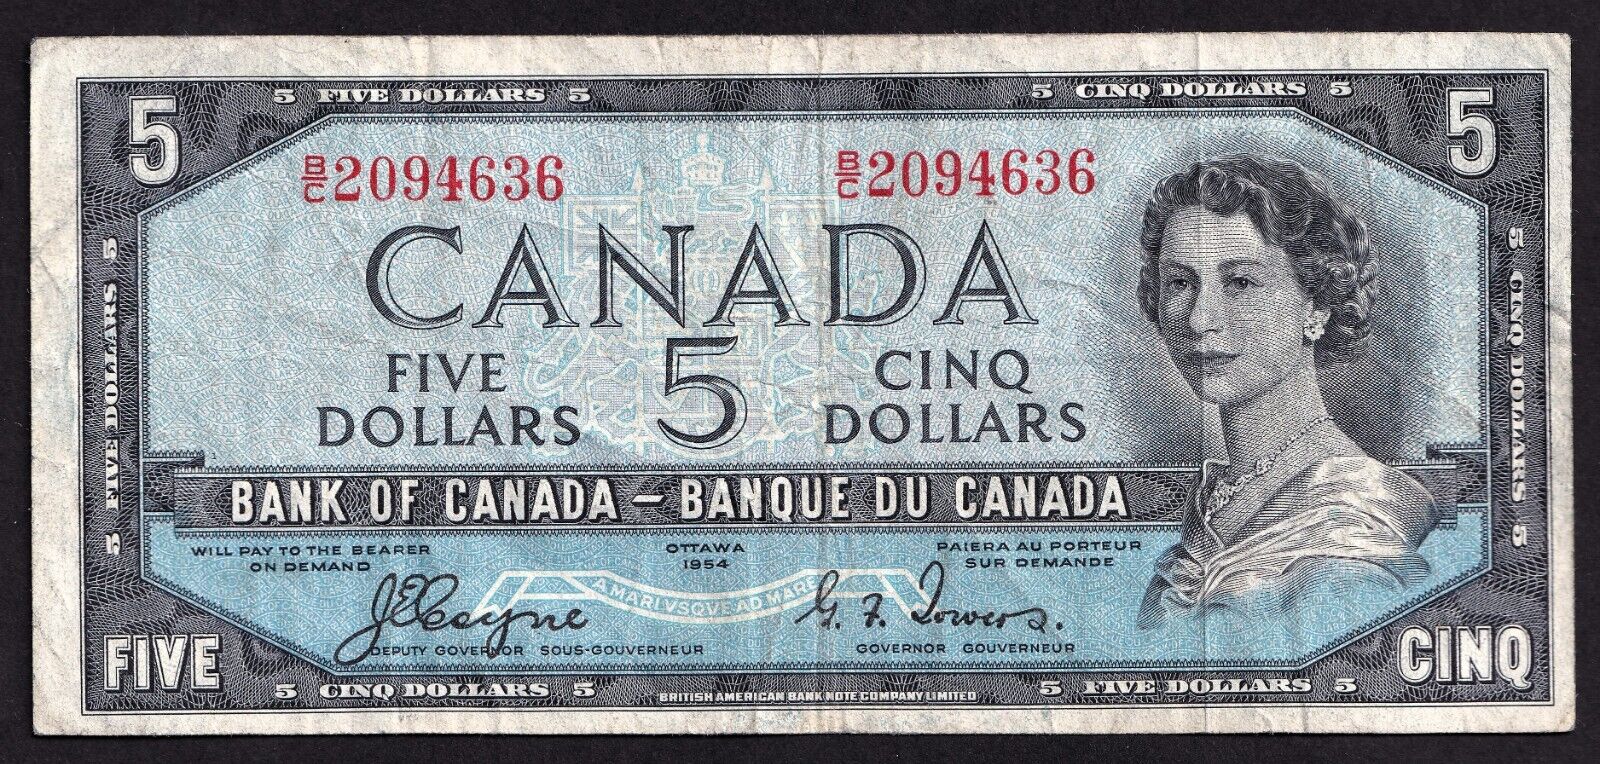 Canada 1954 $5 Five Dollar Banknote Coyne-Towers Devils Face B/C 2094636